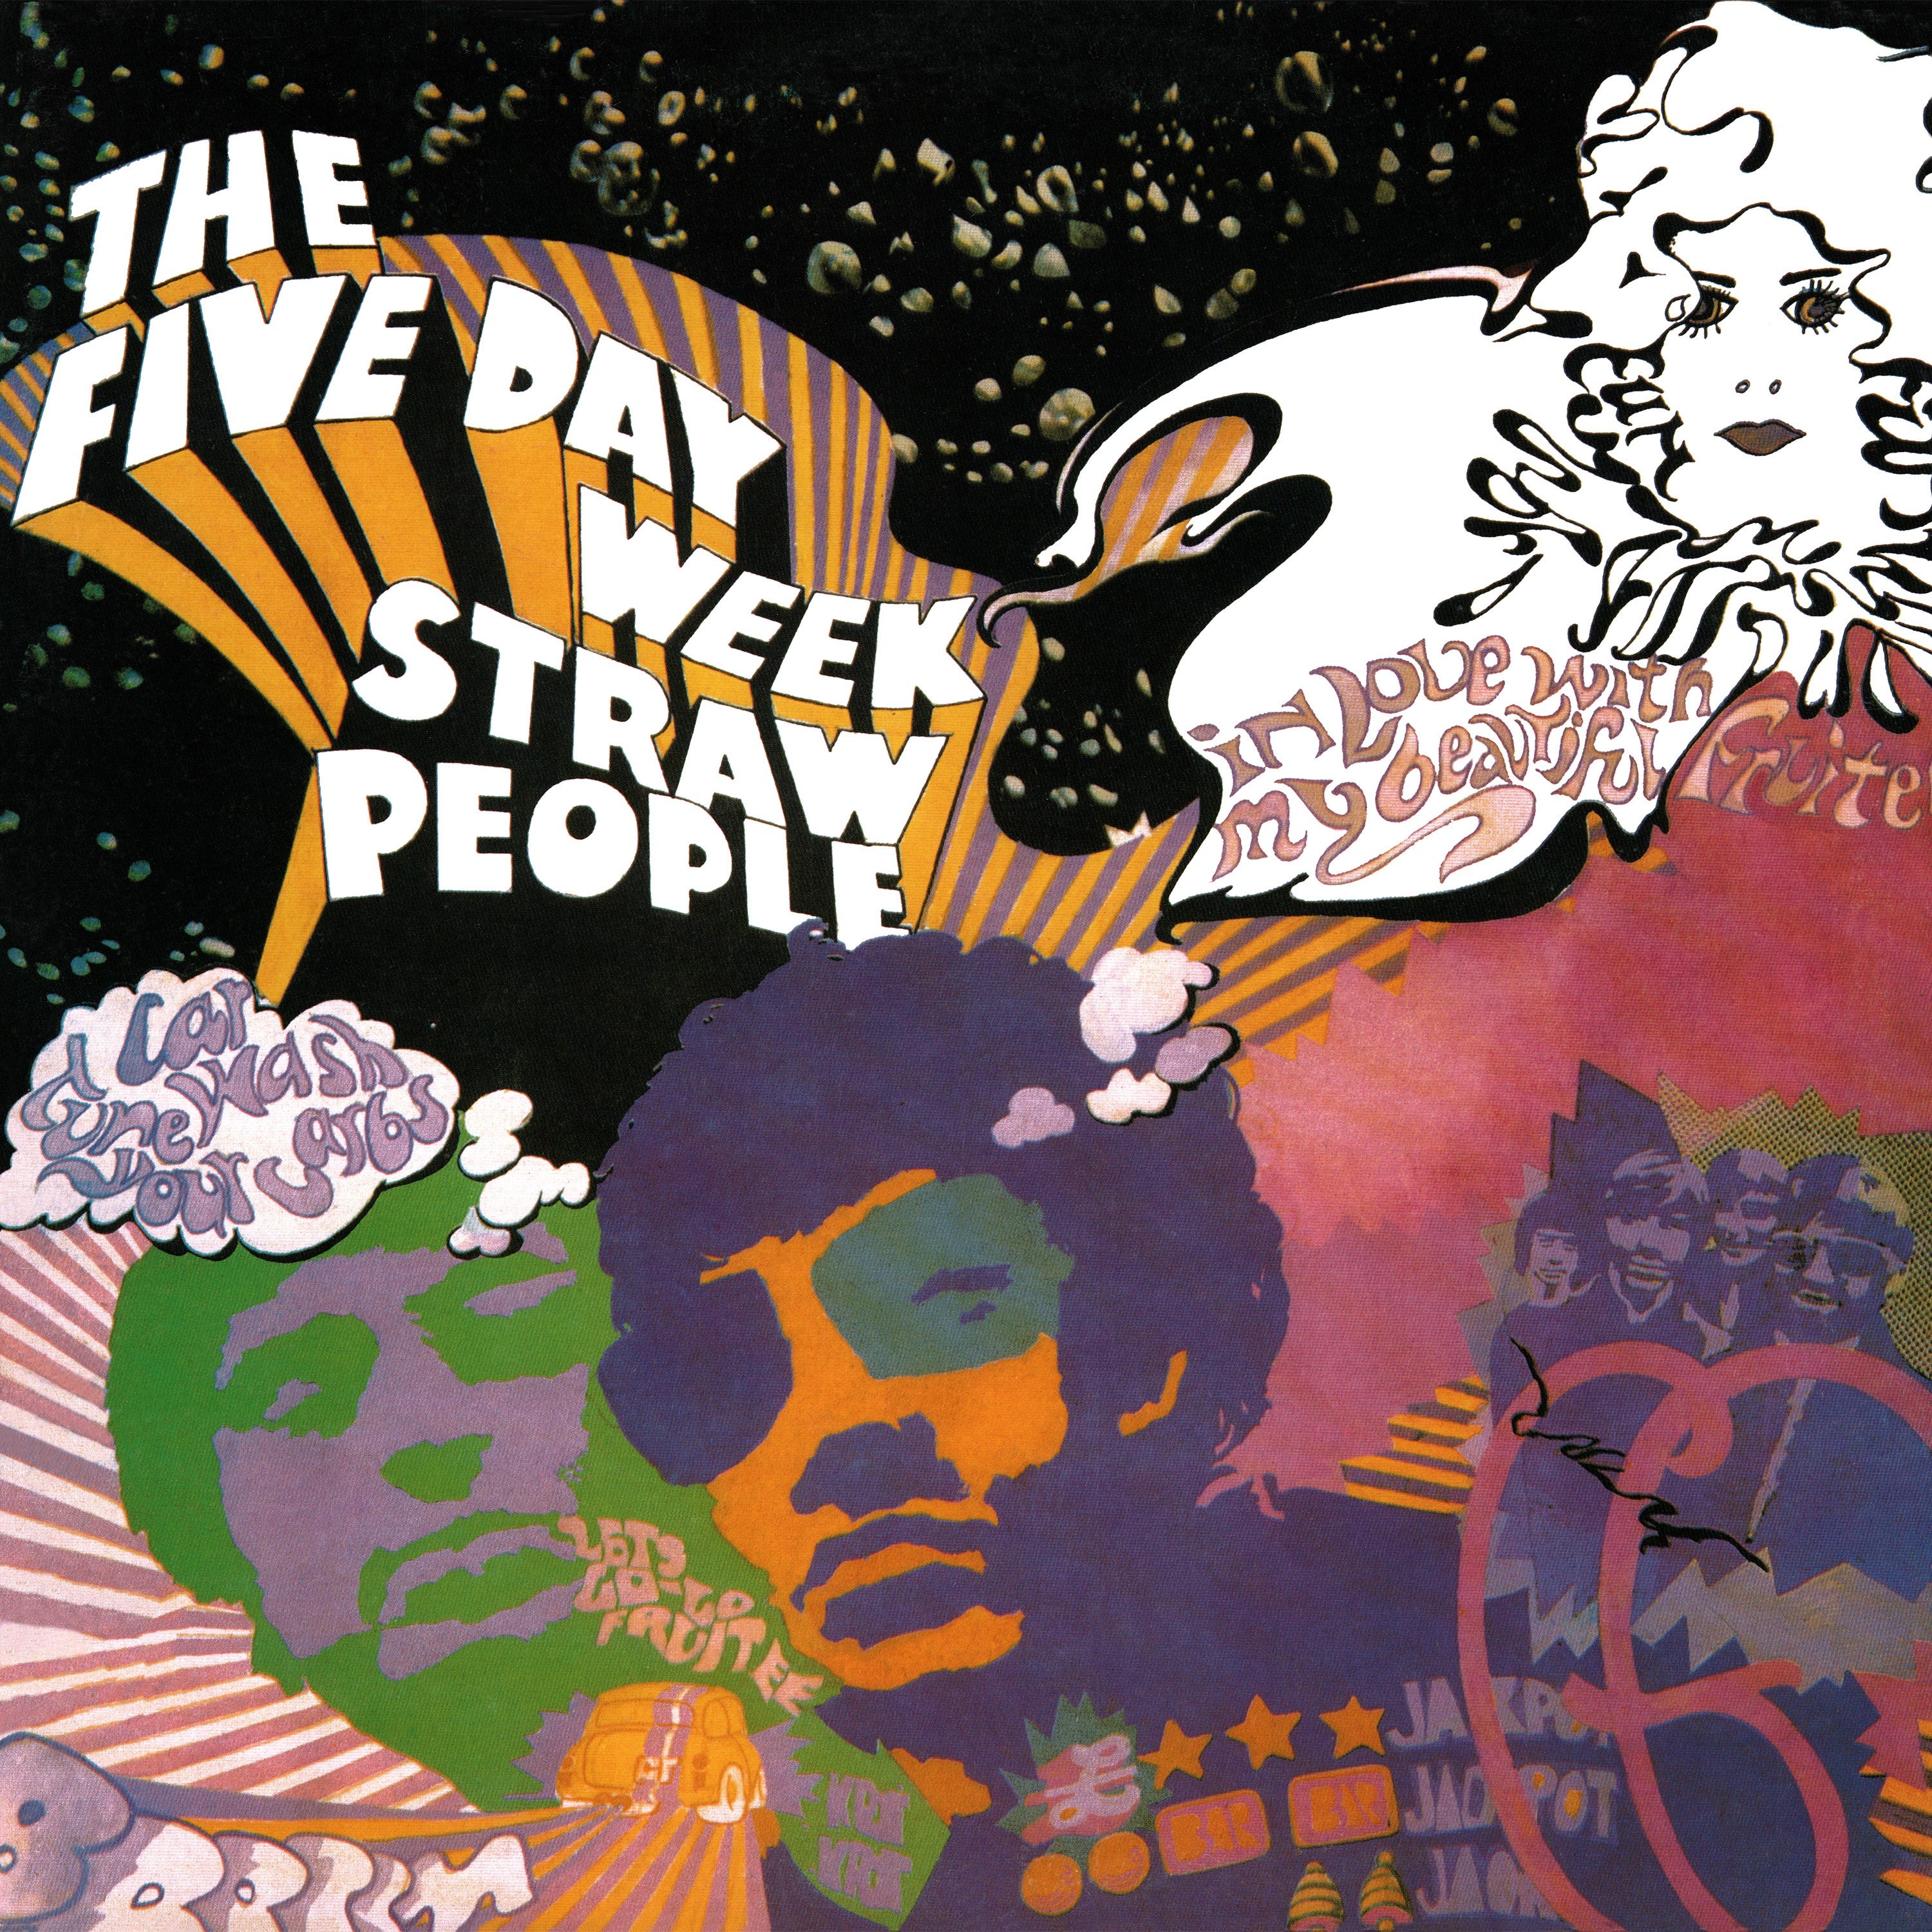 The Five Day Week Straw People - Five Day Week Straw People - Straw Coloured Vinyl LP